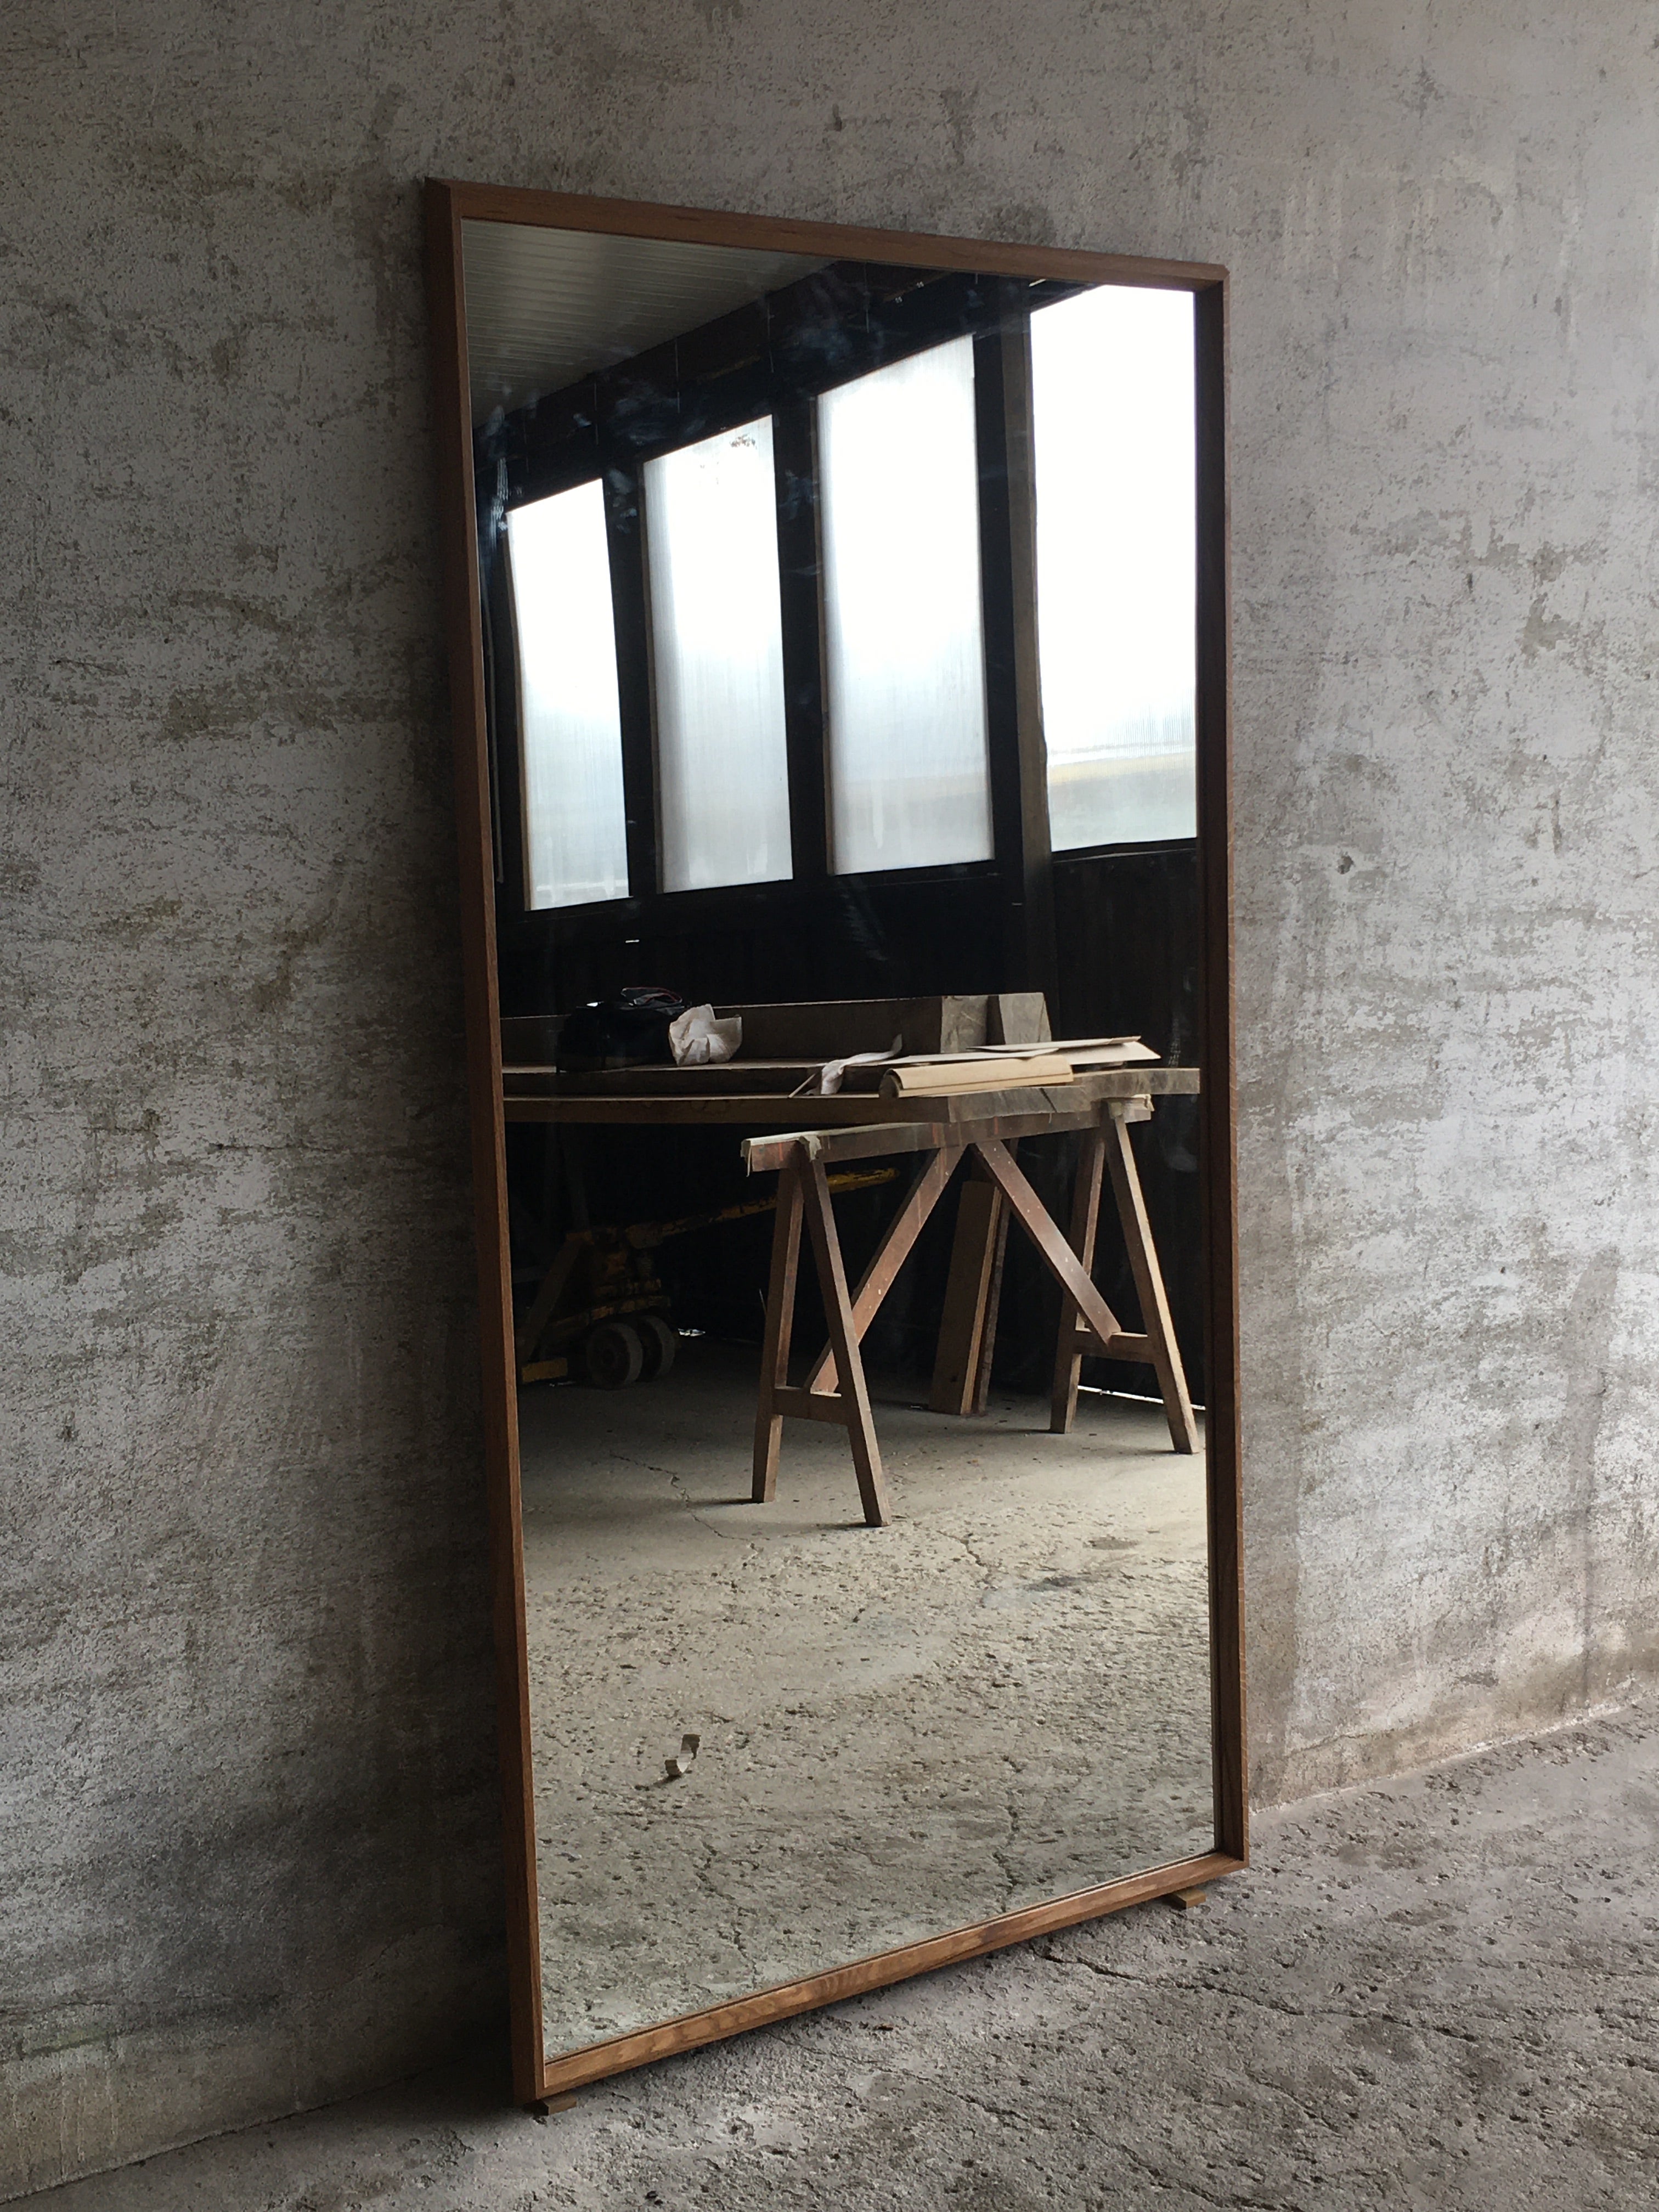 This carefully designed and handcrafted wooden mirror frame, designed and made by Tomaz Viana consists of a very angular profile made from a very expressive grained Iberian oak with several knots. It frames a 4mm mirror and a 6mm plywood board gives